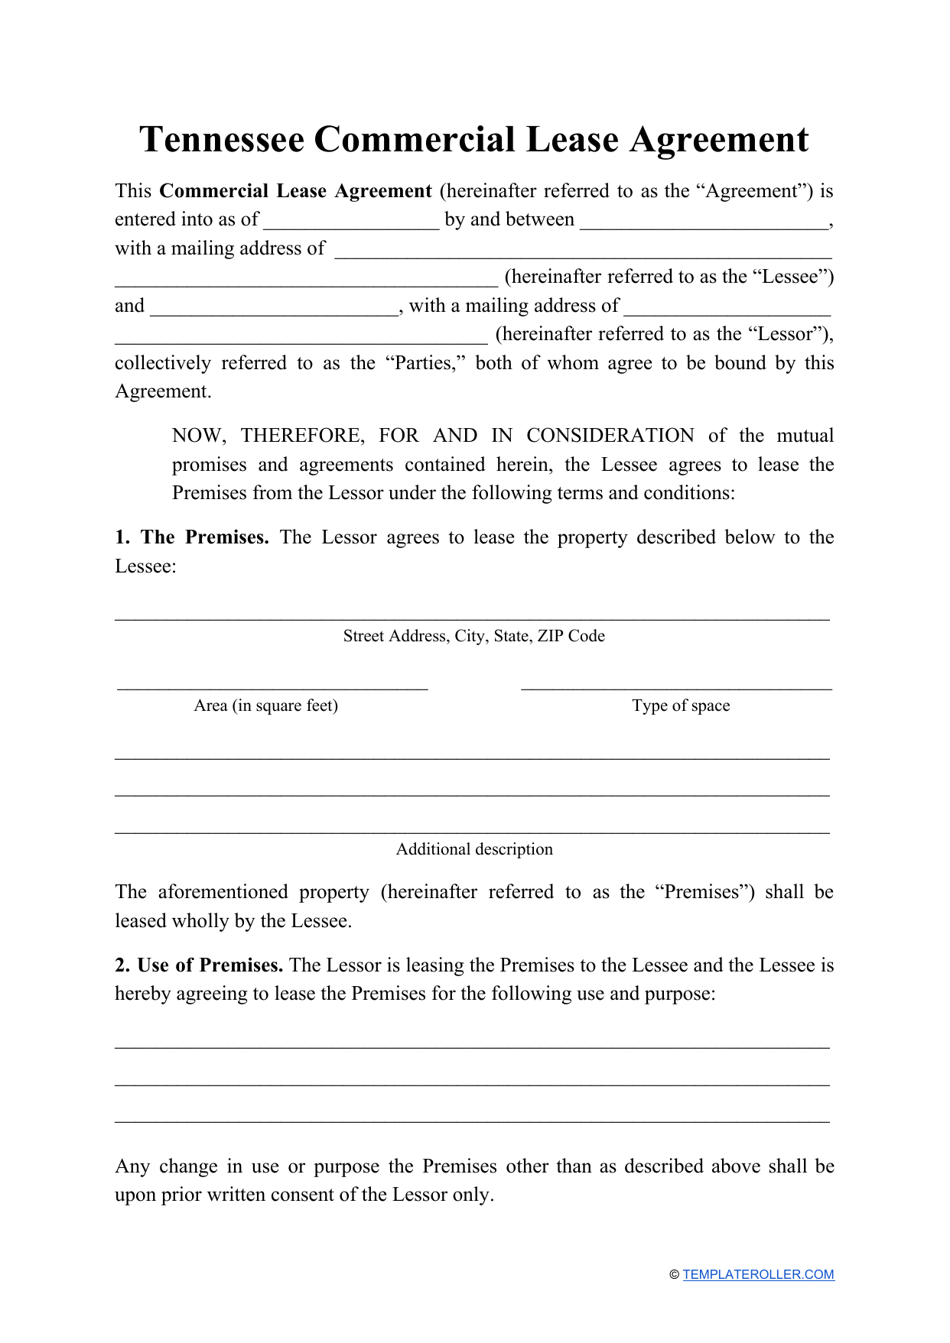 Commercial Lease Agreement Template - Tennessee, Page 1